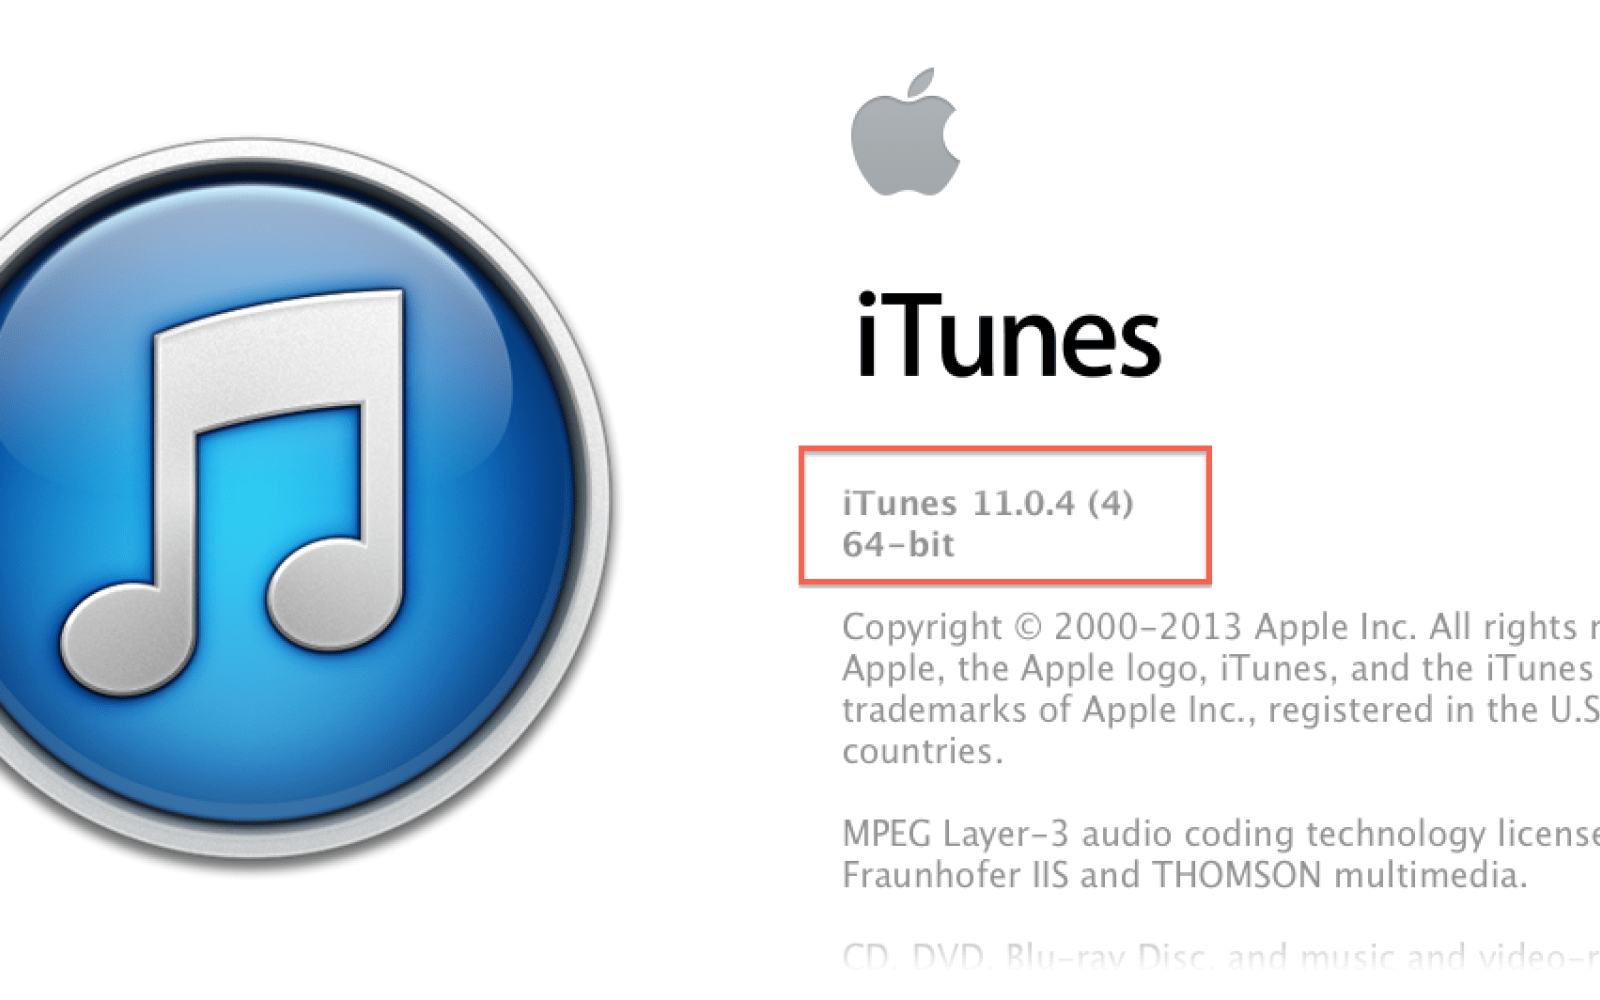 iTunes Store Logo - Apple releases iTunes 11.0.4 with fixes for syncing, iTunes Store